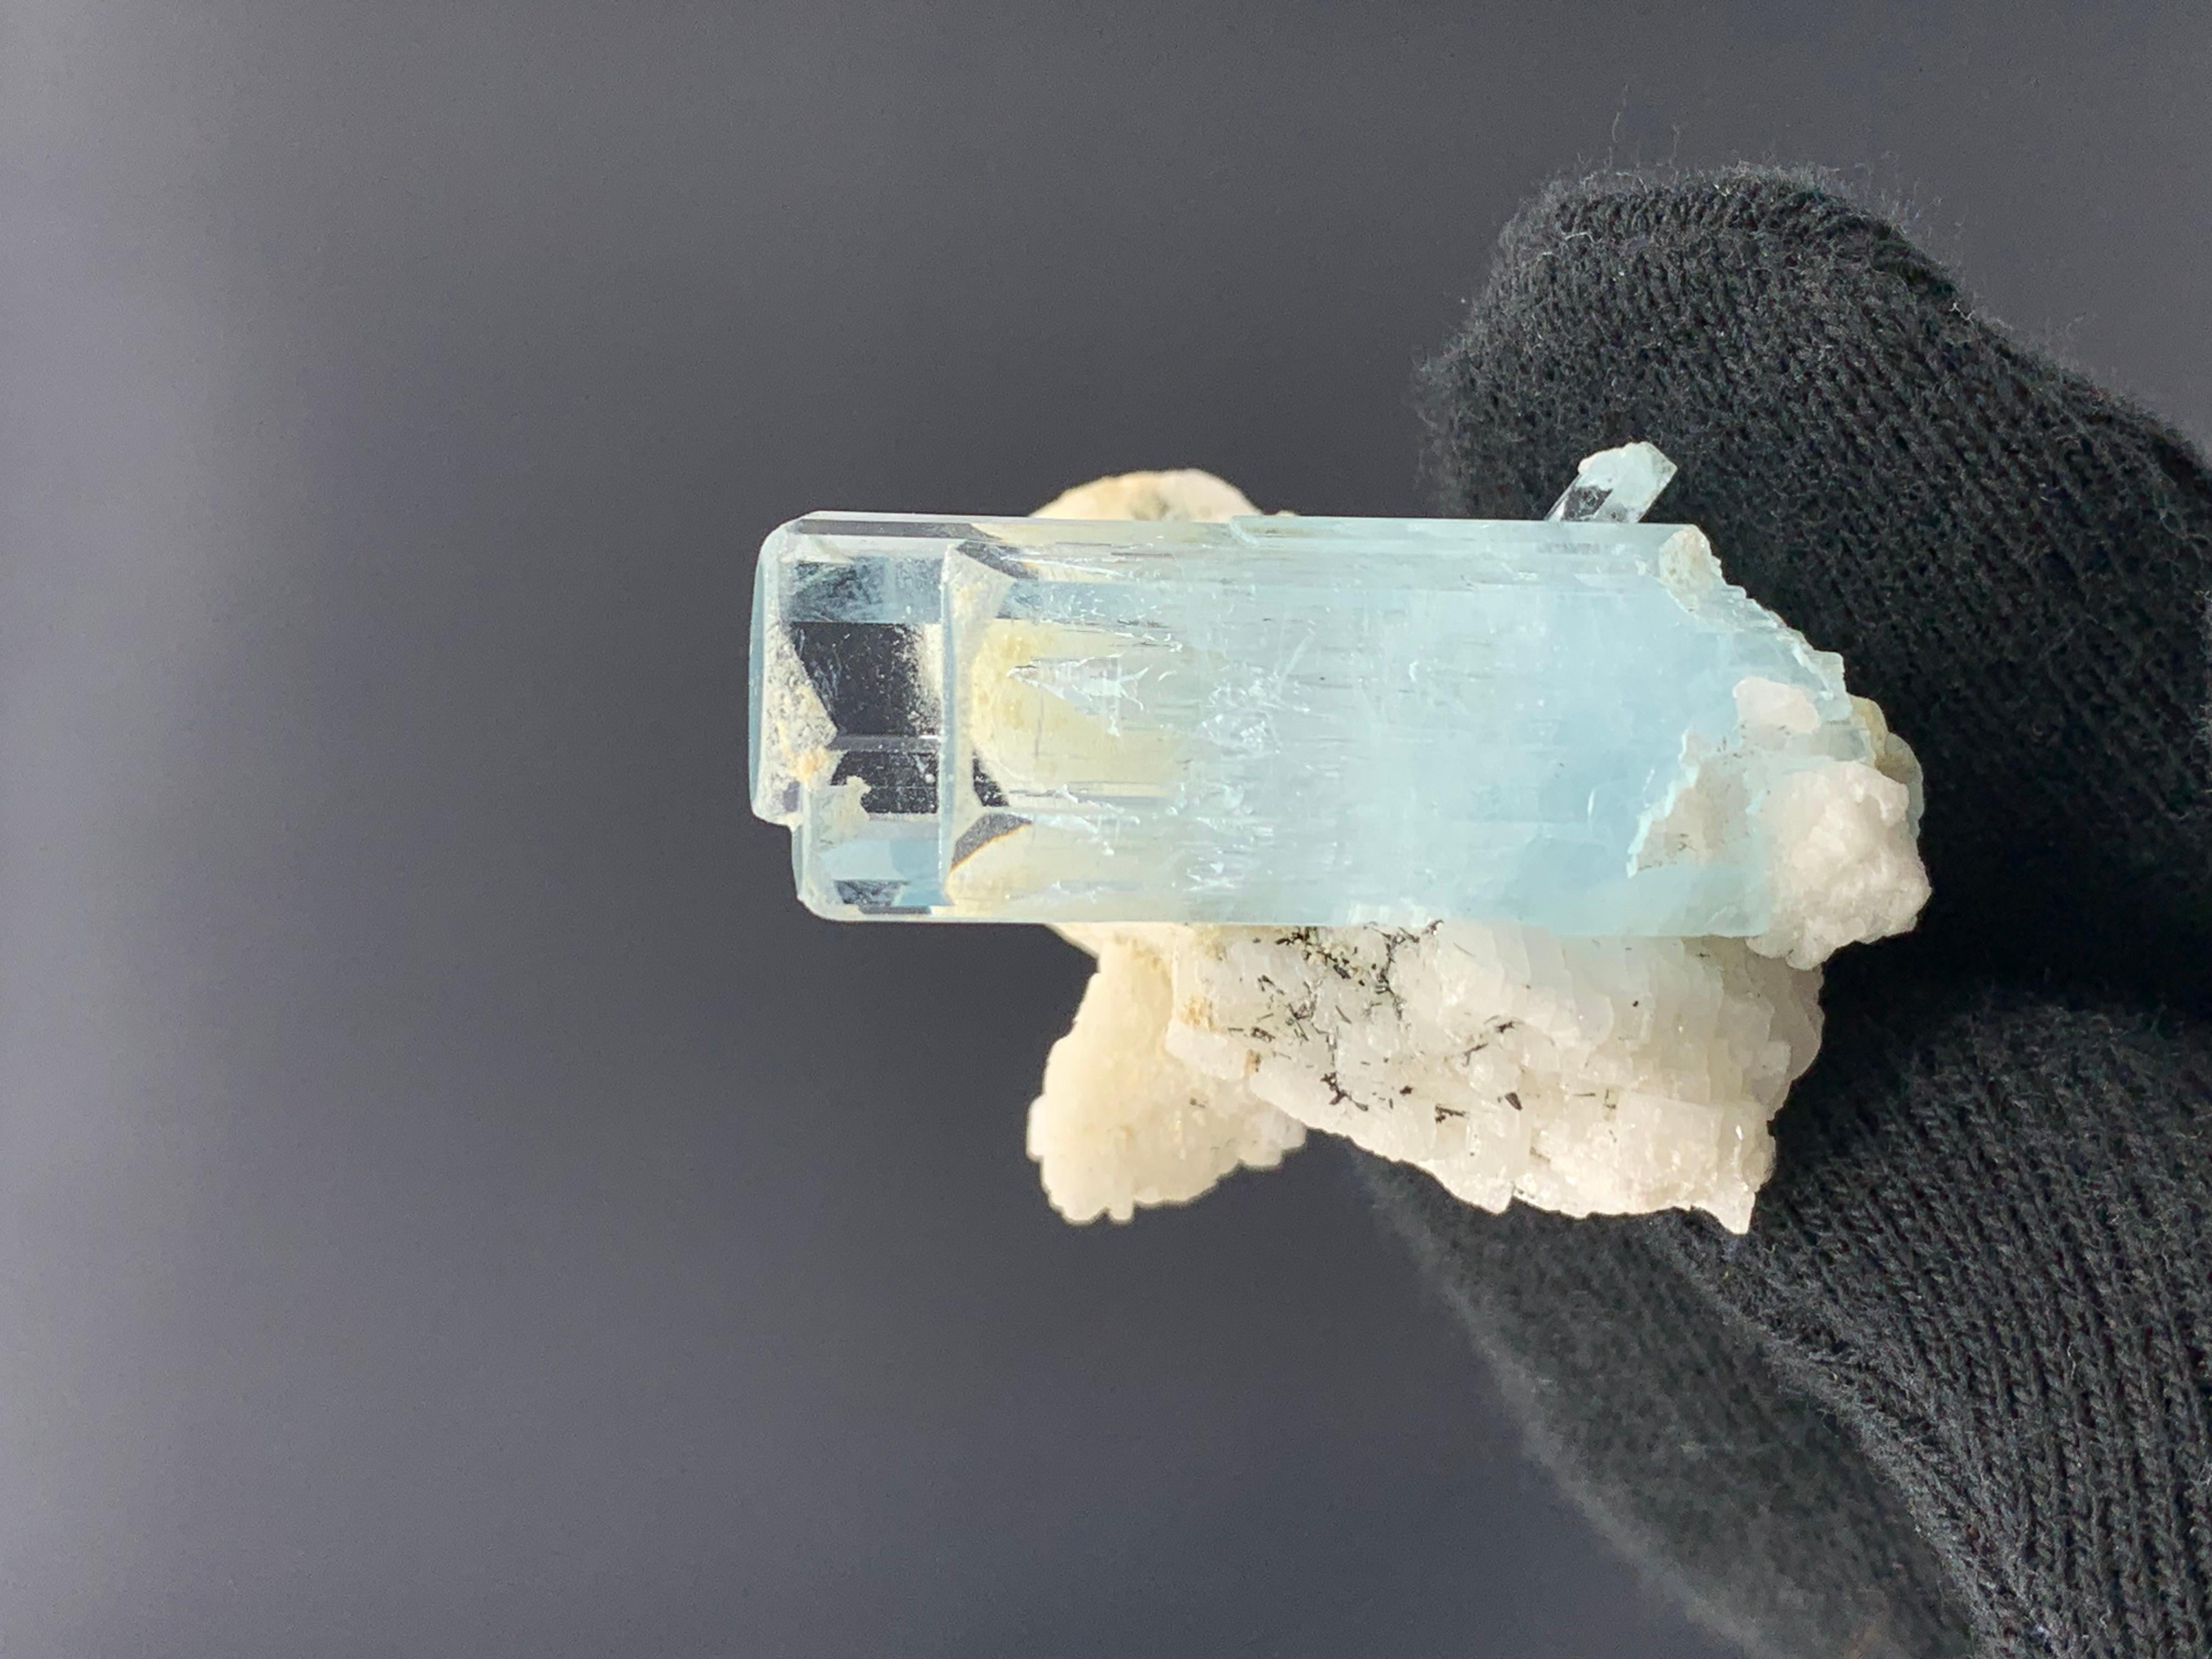 26.33 Gram Adorable Aquamarine Specimen From Shigar Valley, Skardu, Pakistan

Weight: 26.33 Gram 
Dimension: 3.8 x 3.7 x 3.3 Cm
Origin: Shigar Valley, Skardu District, Pakistan 

Aquamarine is a pale-blue to light-green variety of beryl. The color